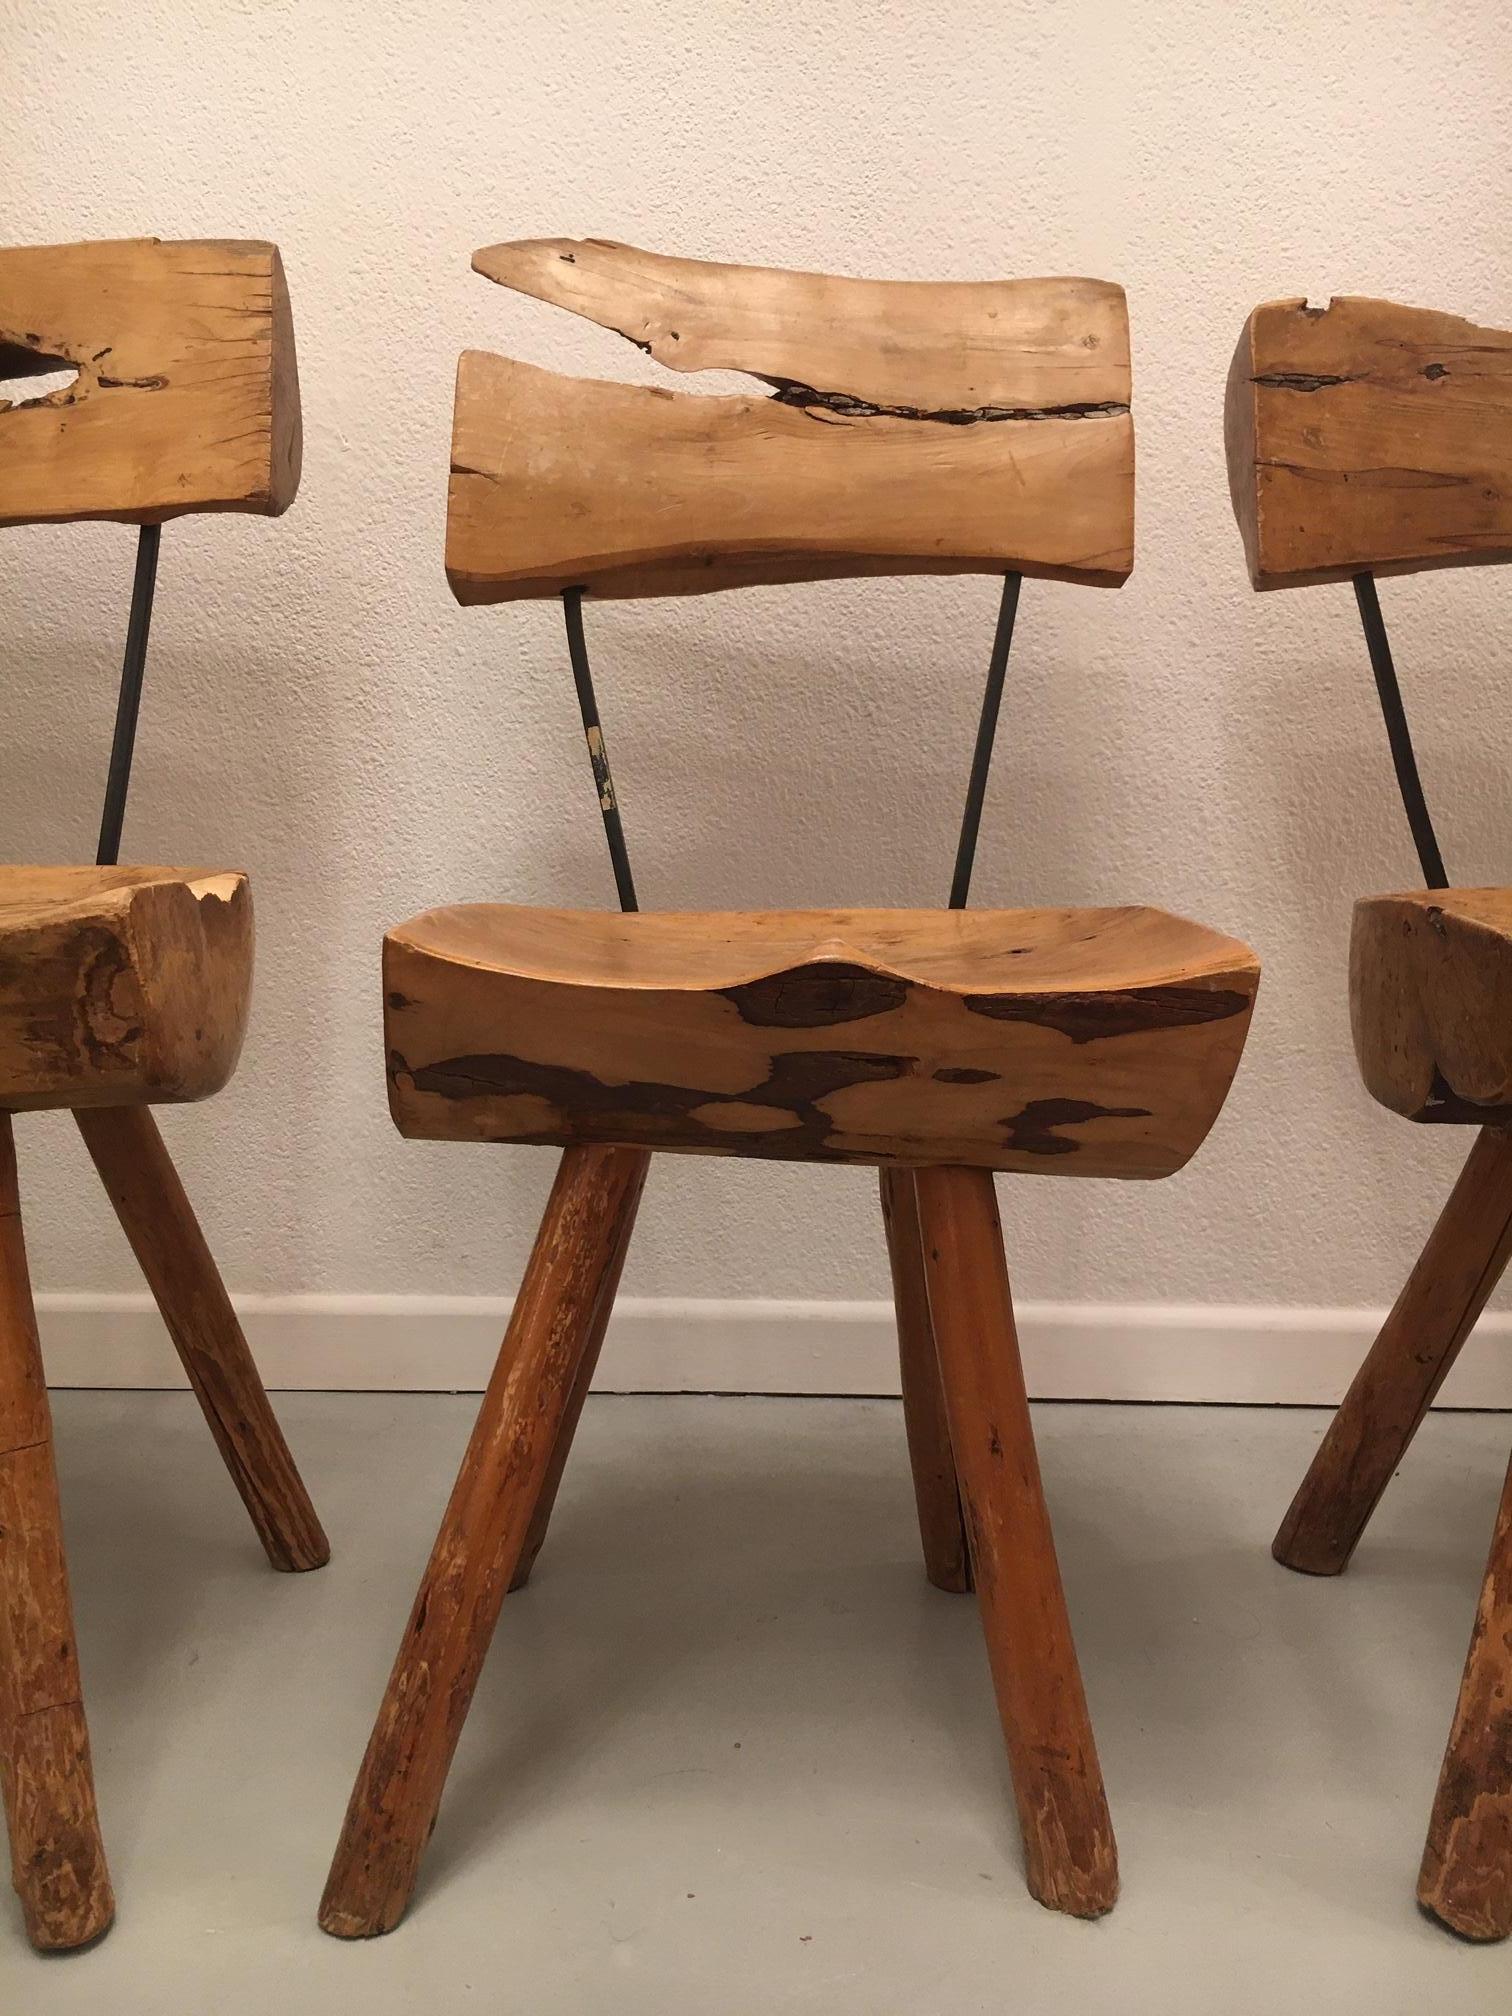 Mid-20th Century Set of 5 Solid Olive Wood Brutalist Rustic Dining Chairs, circa 1950s For Sale